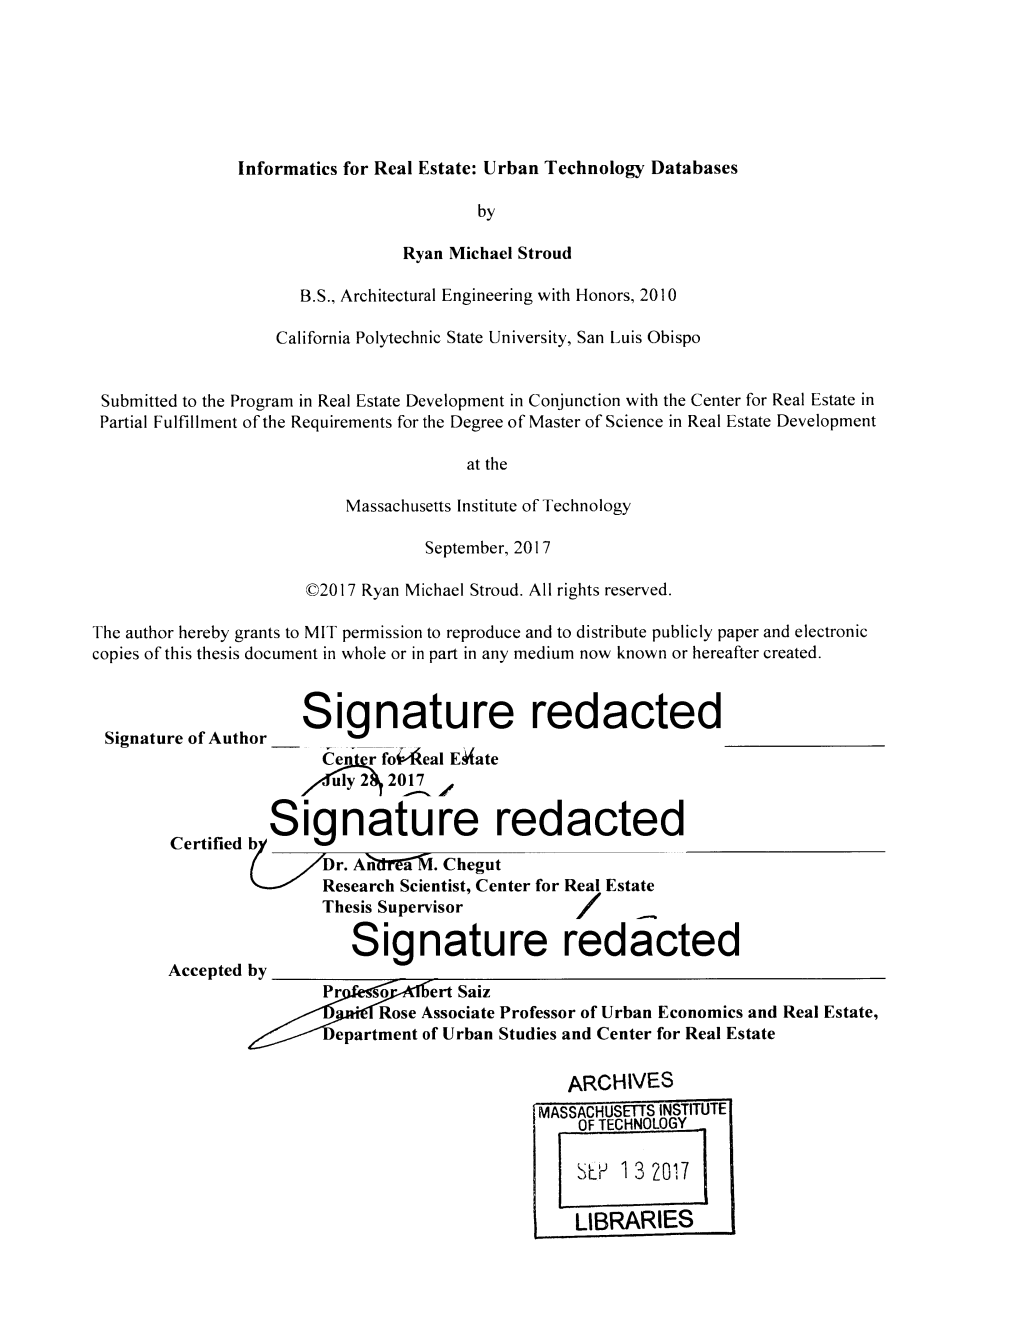 Signature Redacted Ce R Foiieal Egate Z4uly 2 2017